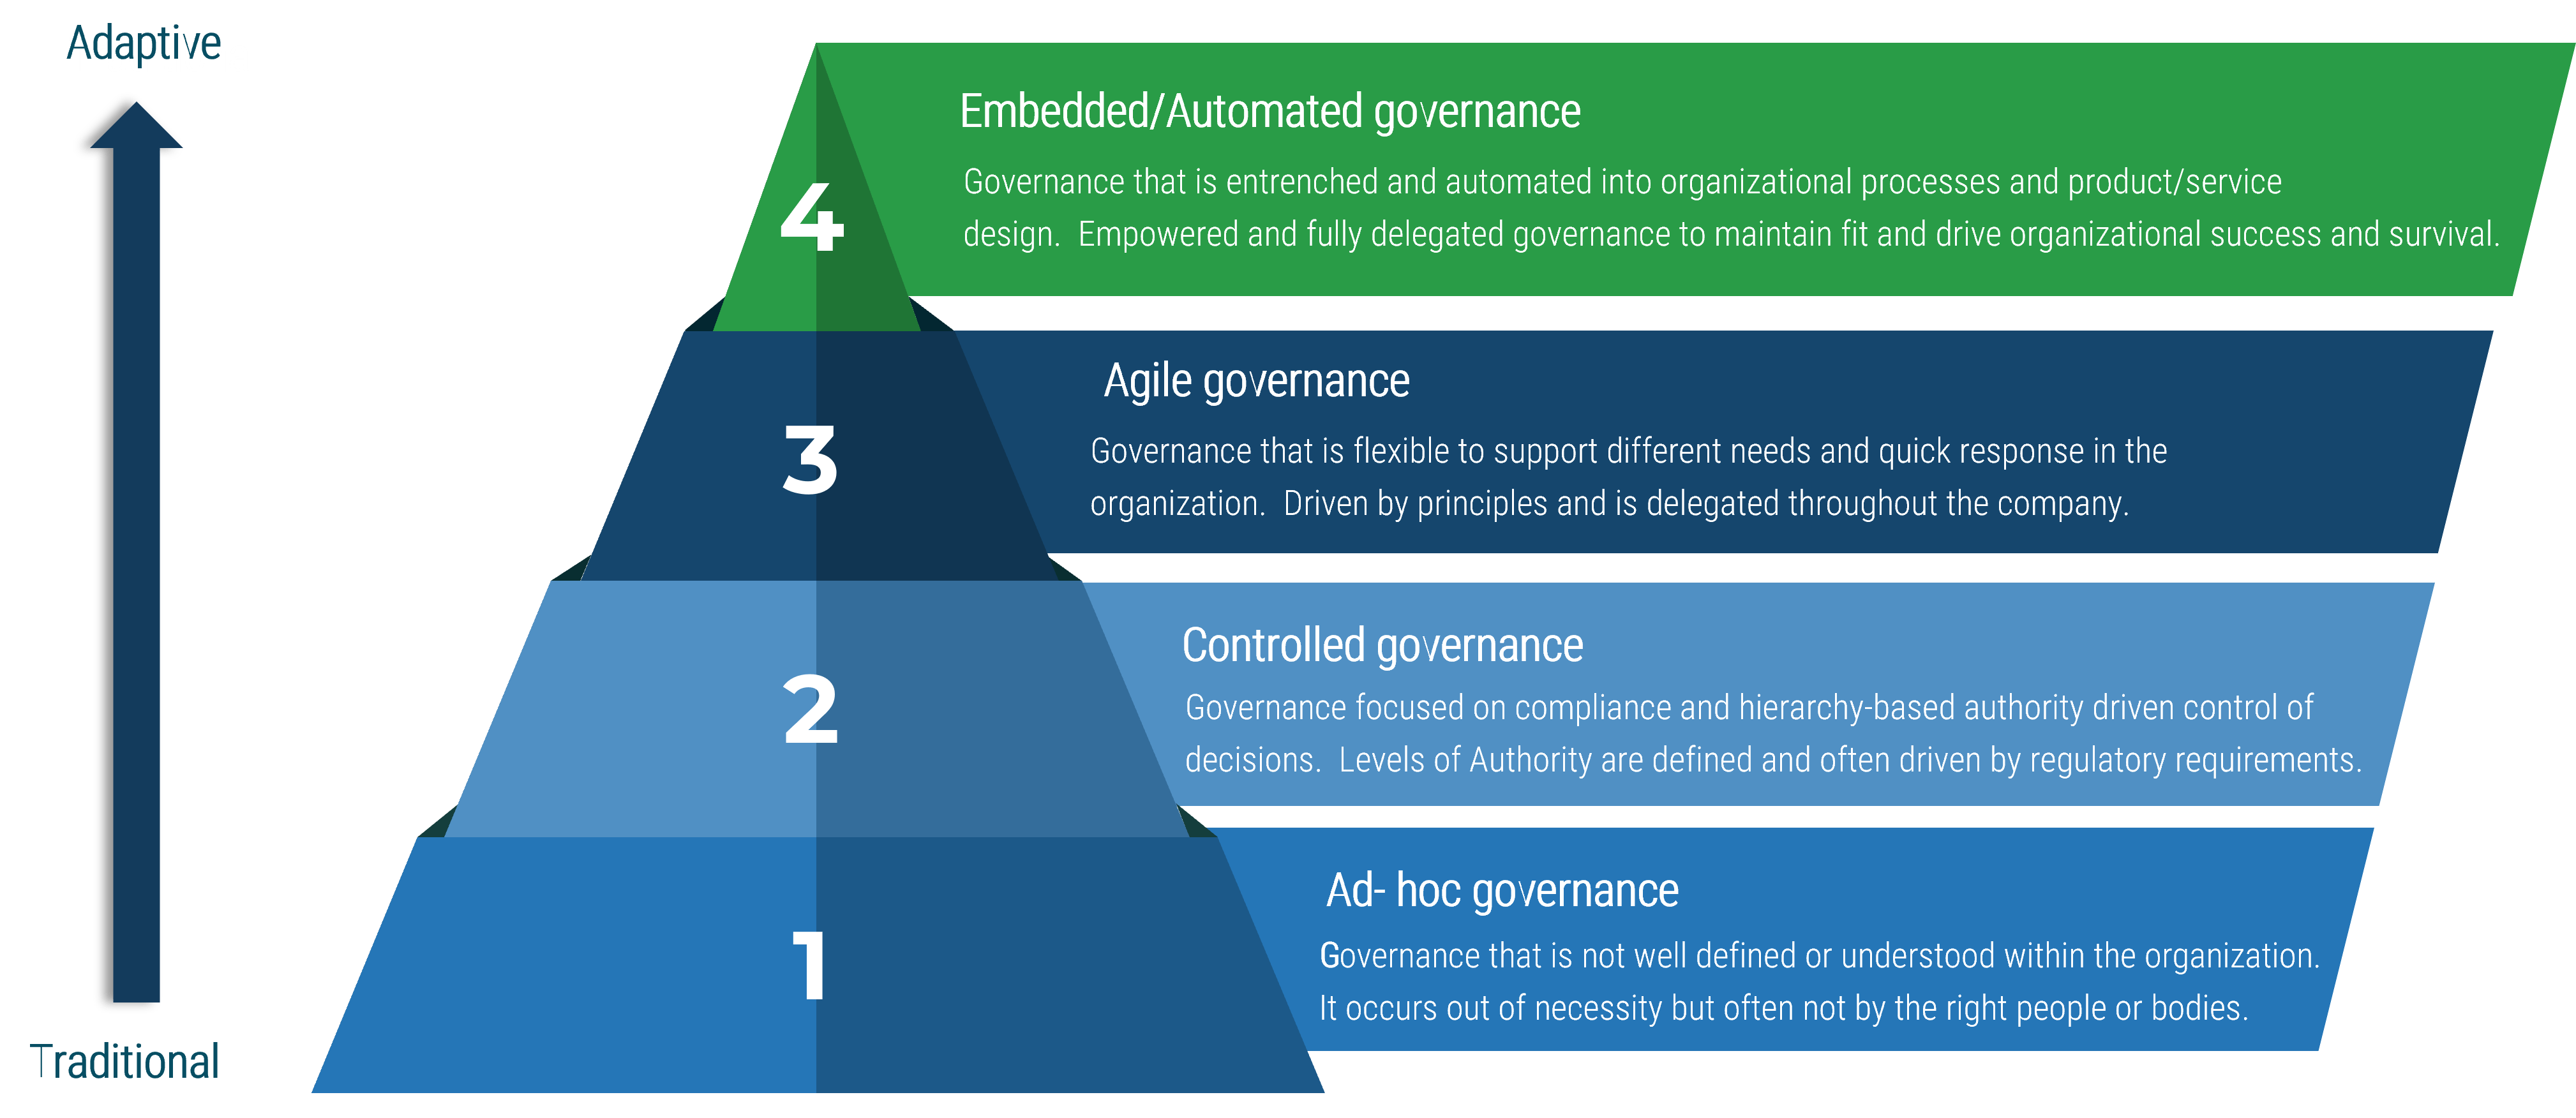 A pyramid, with the number 4 at the apex, and the number 1 at the base.  In order from base-apex, the following titles are found to the right of the pyramid: Ad-Hoc governance; Controlled Governance; Agile Governance; Embedded/Automated governance.